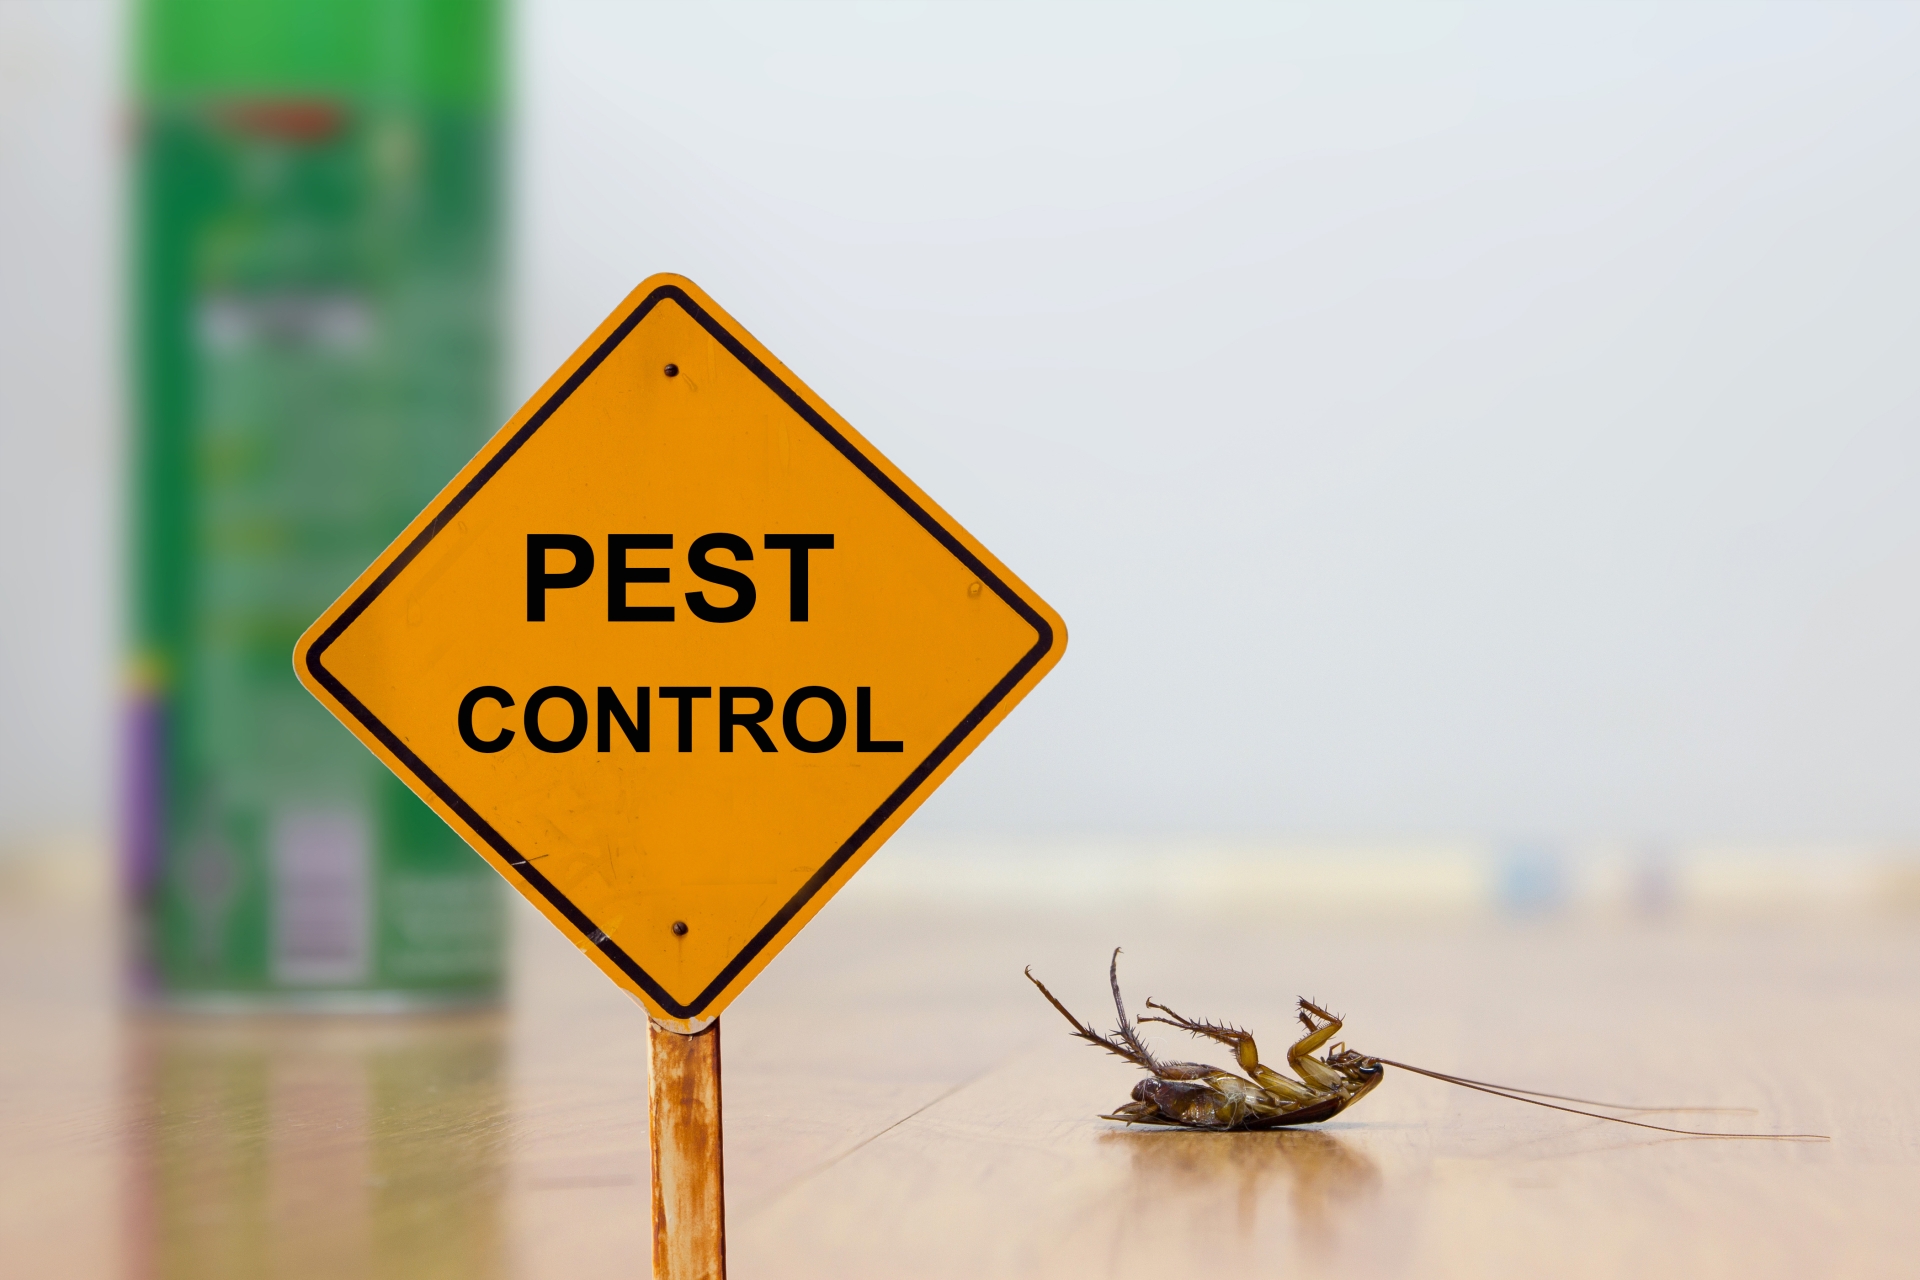 24 Hour Pest Control, Pest Control in Dulwich, SE21. Call Now 020 8166 9746